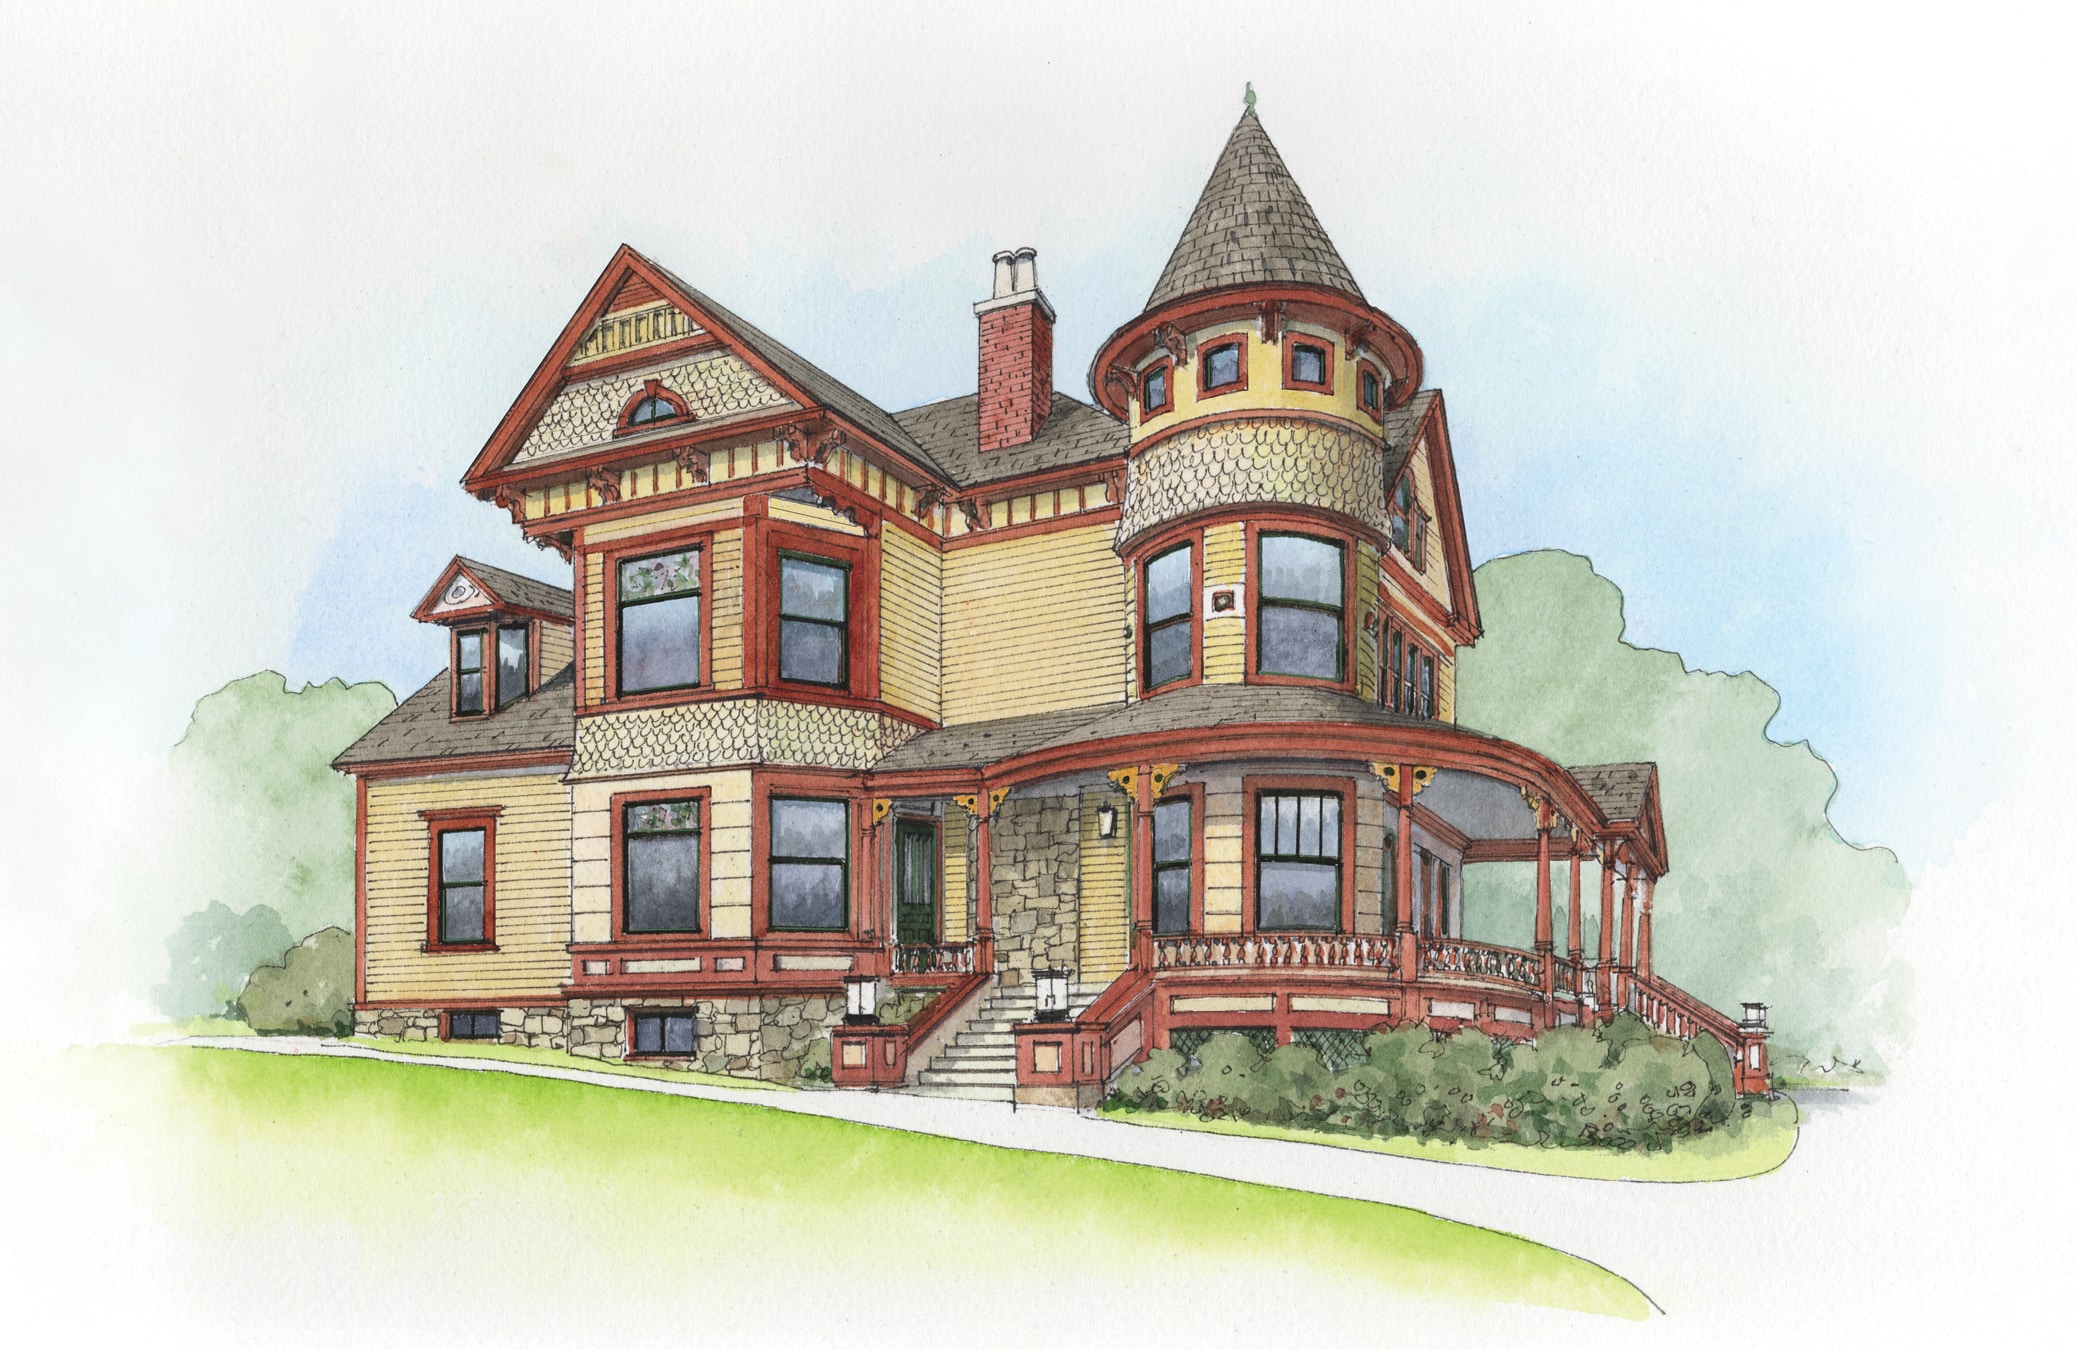 The Queen Anne Style House